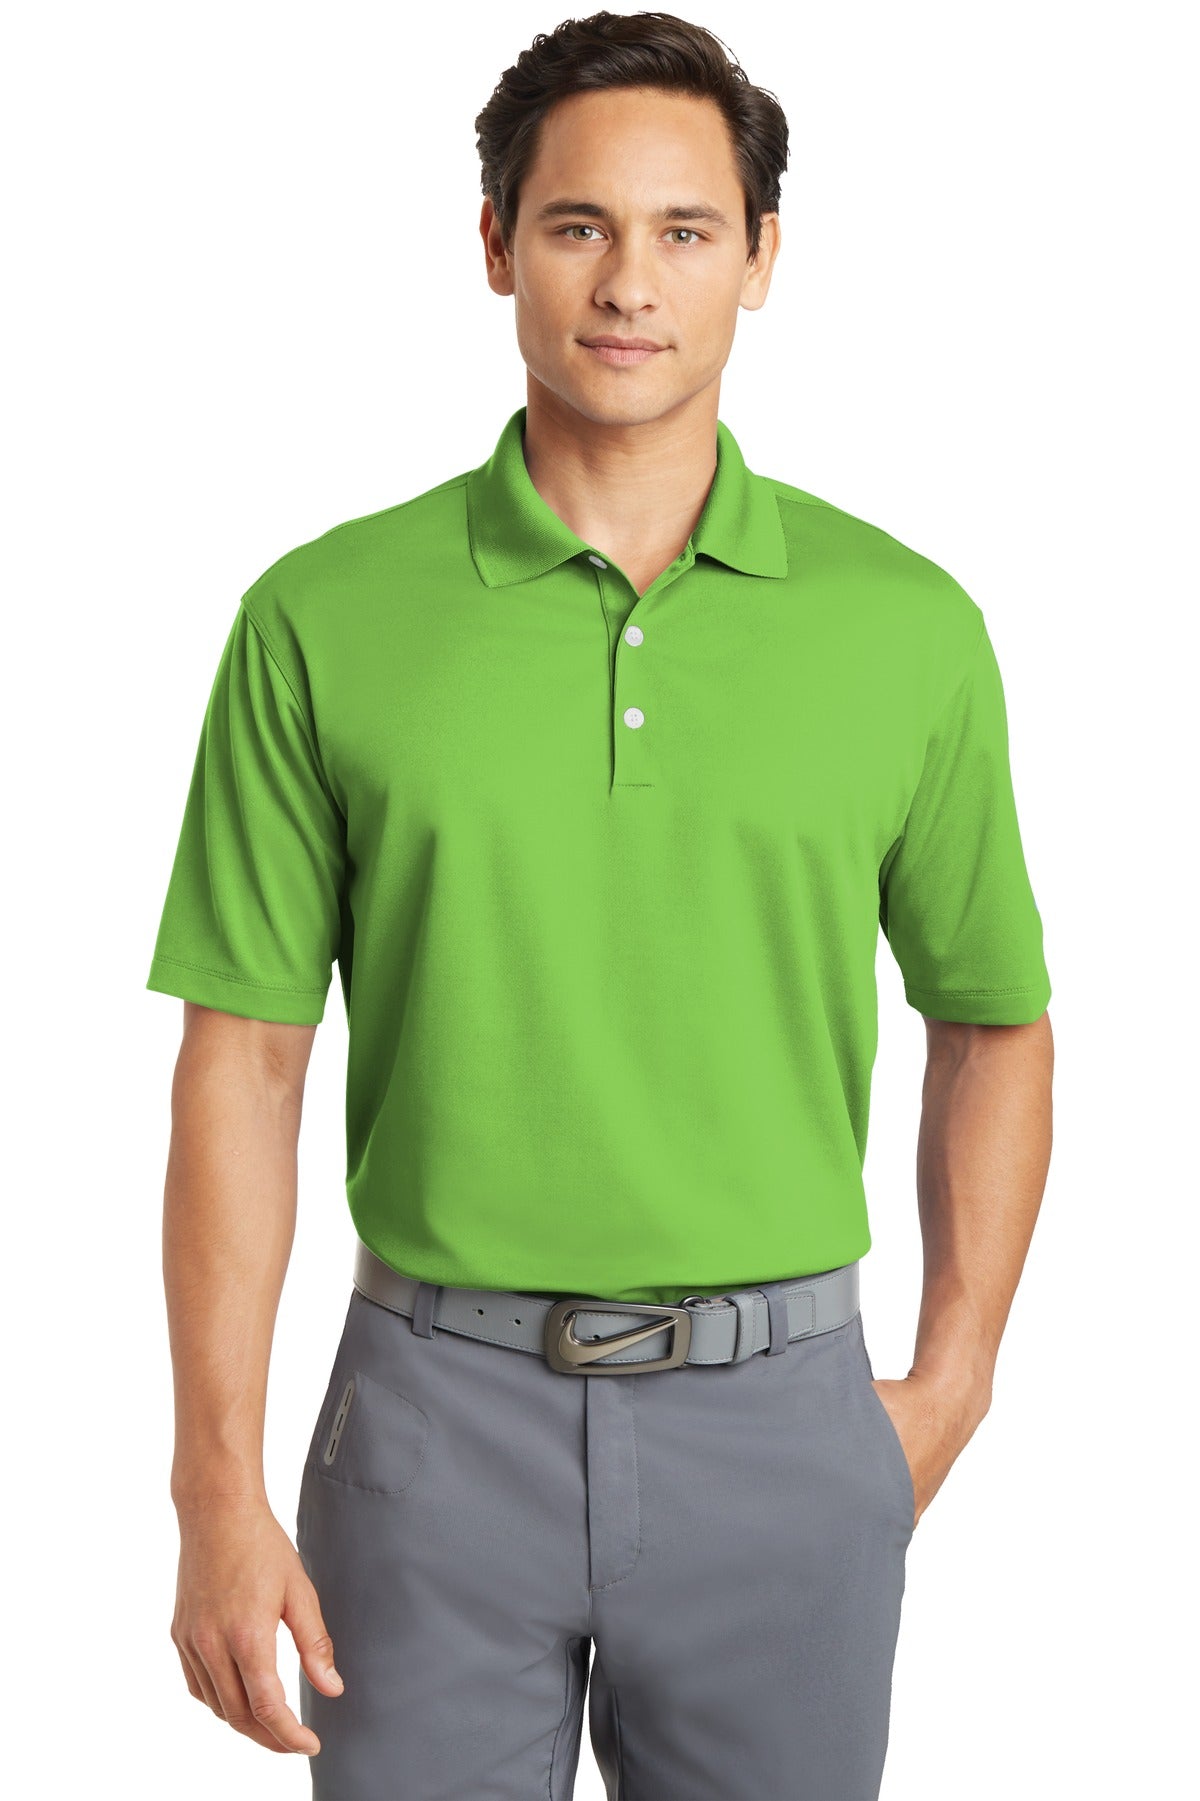 DISCONTINUED Nike Dri-FIT Micro Pique Polo. 363807 [Action Green] - DFW Impression